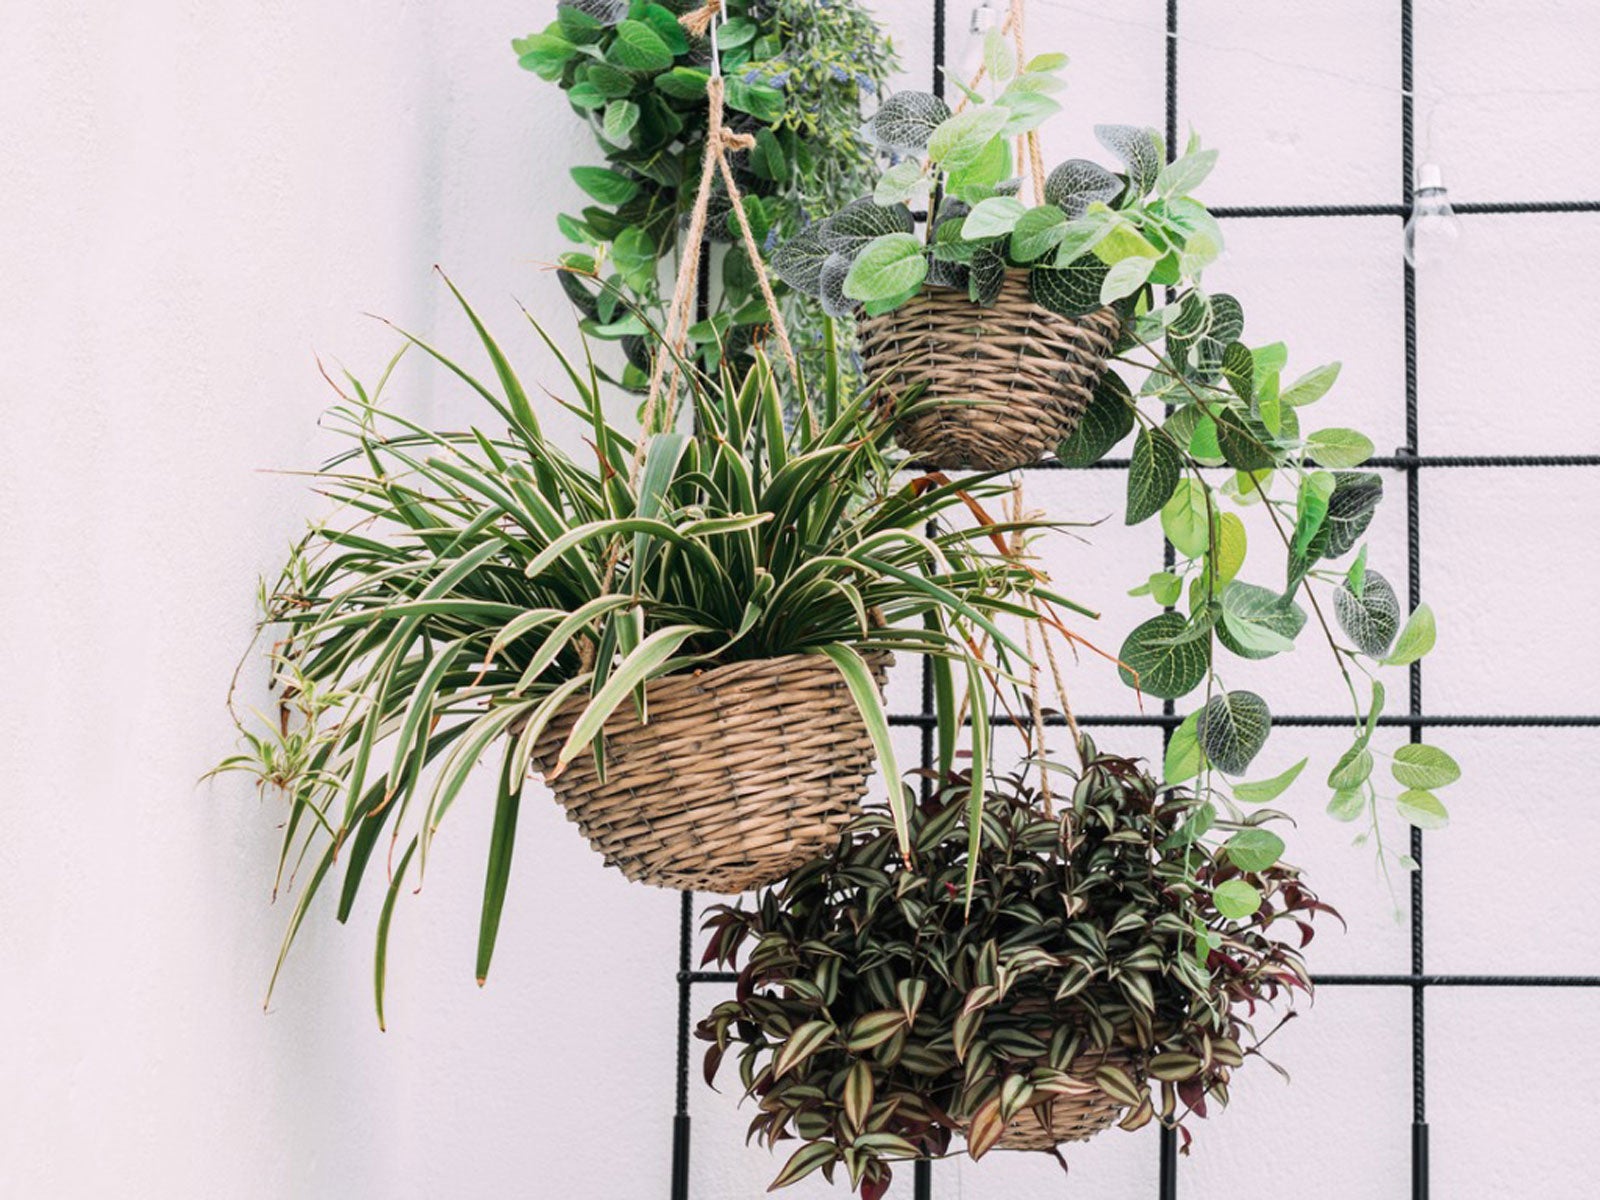 How to Turn a Woven Basket Into a Pretty Planter